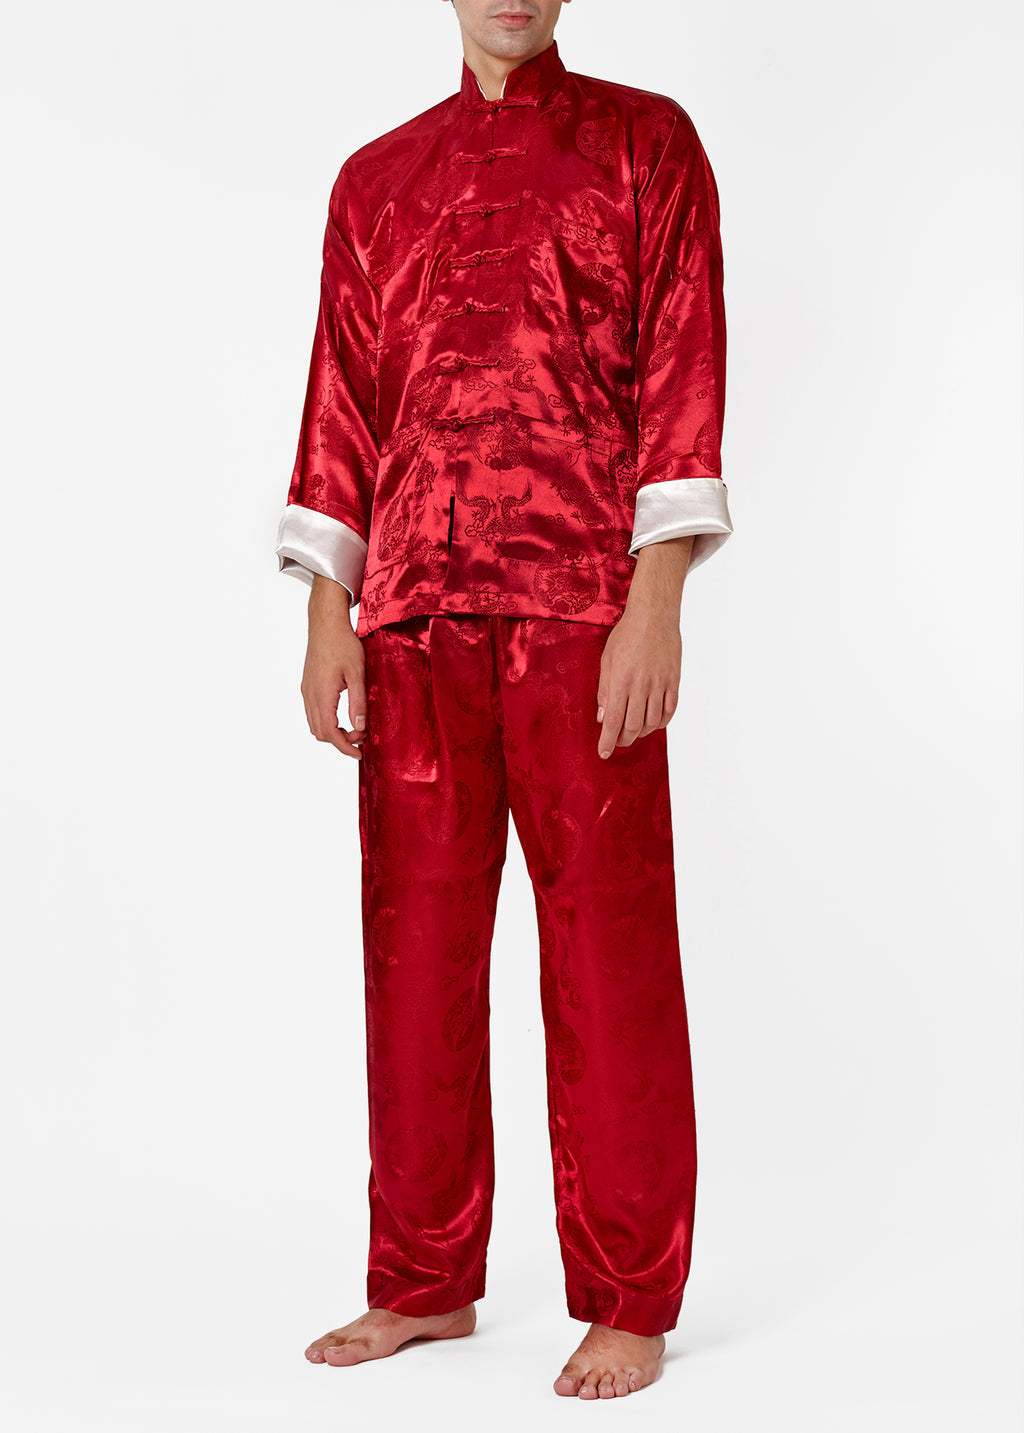 Kung Fu Suit Red